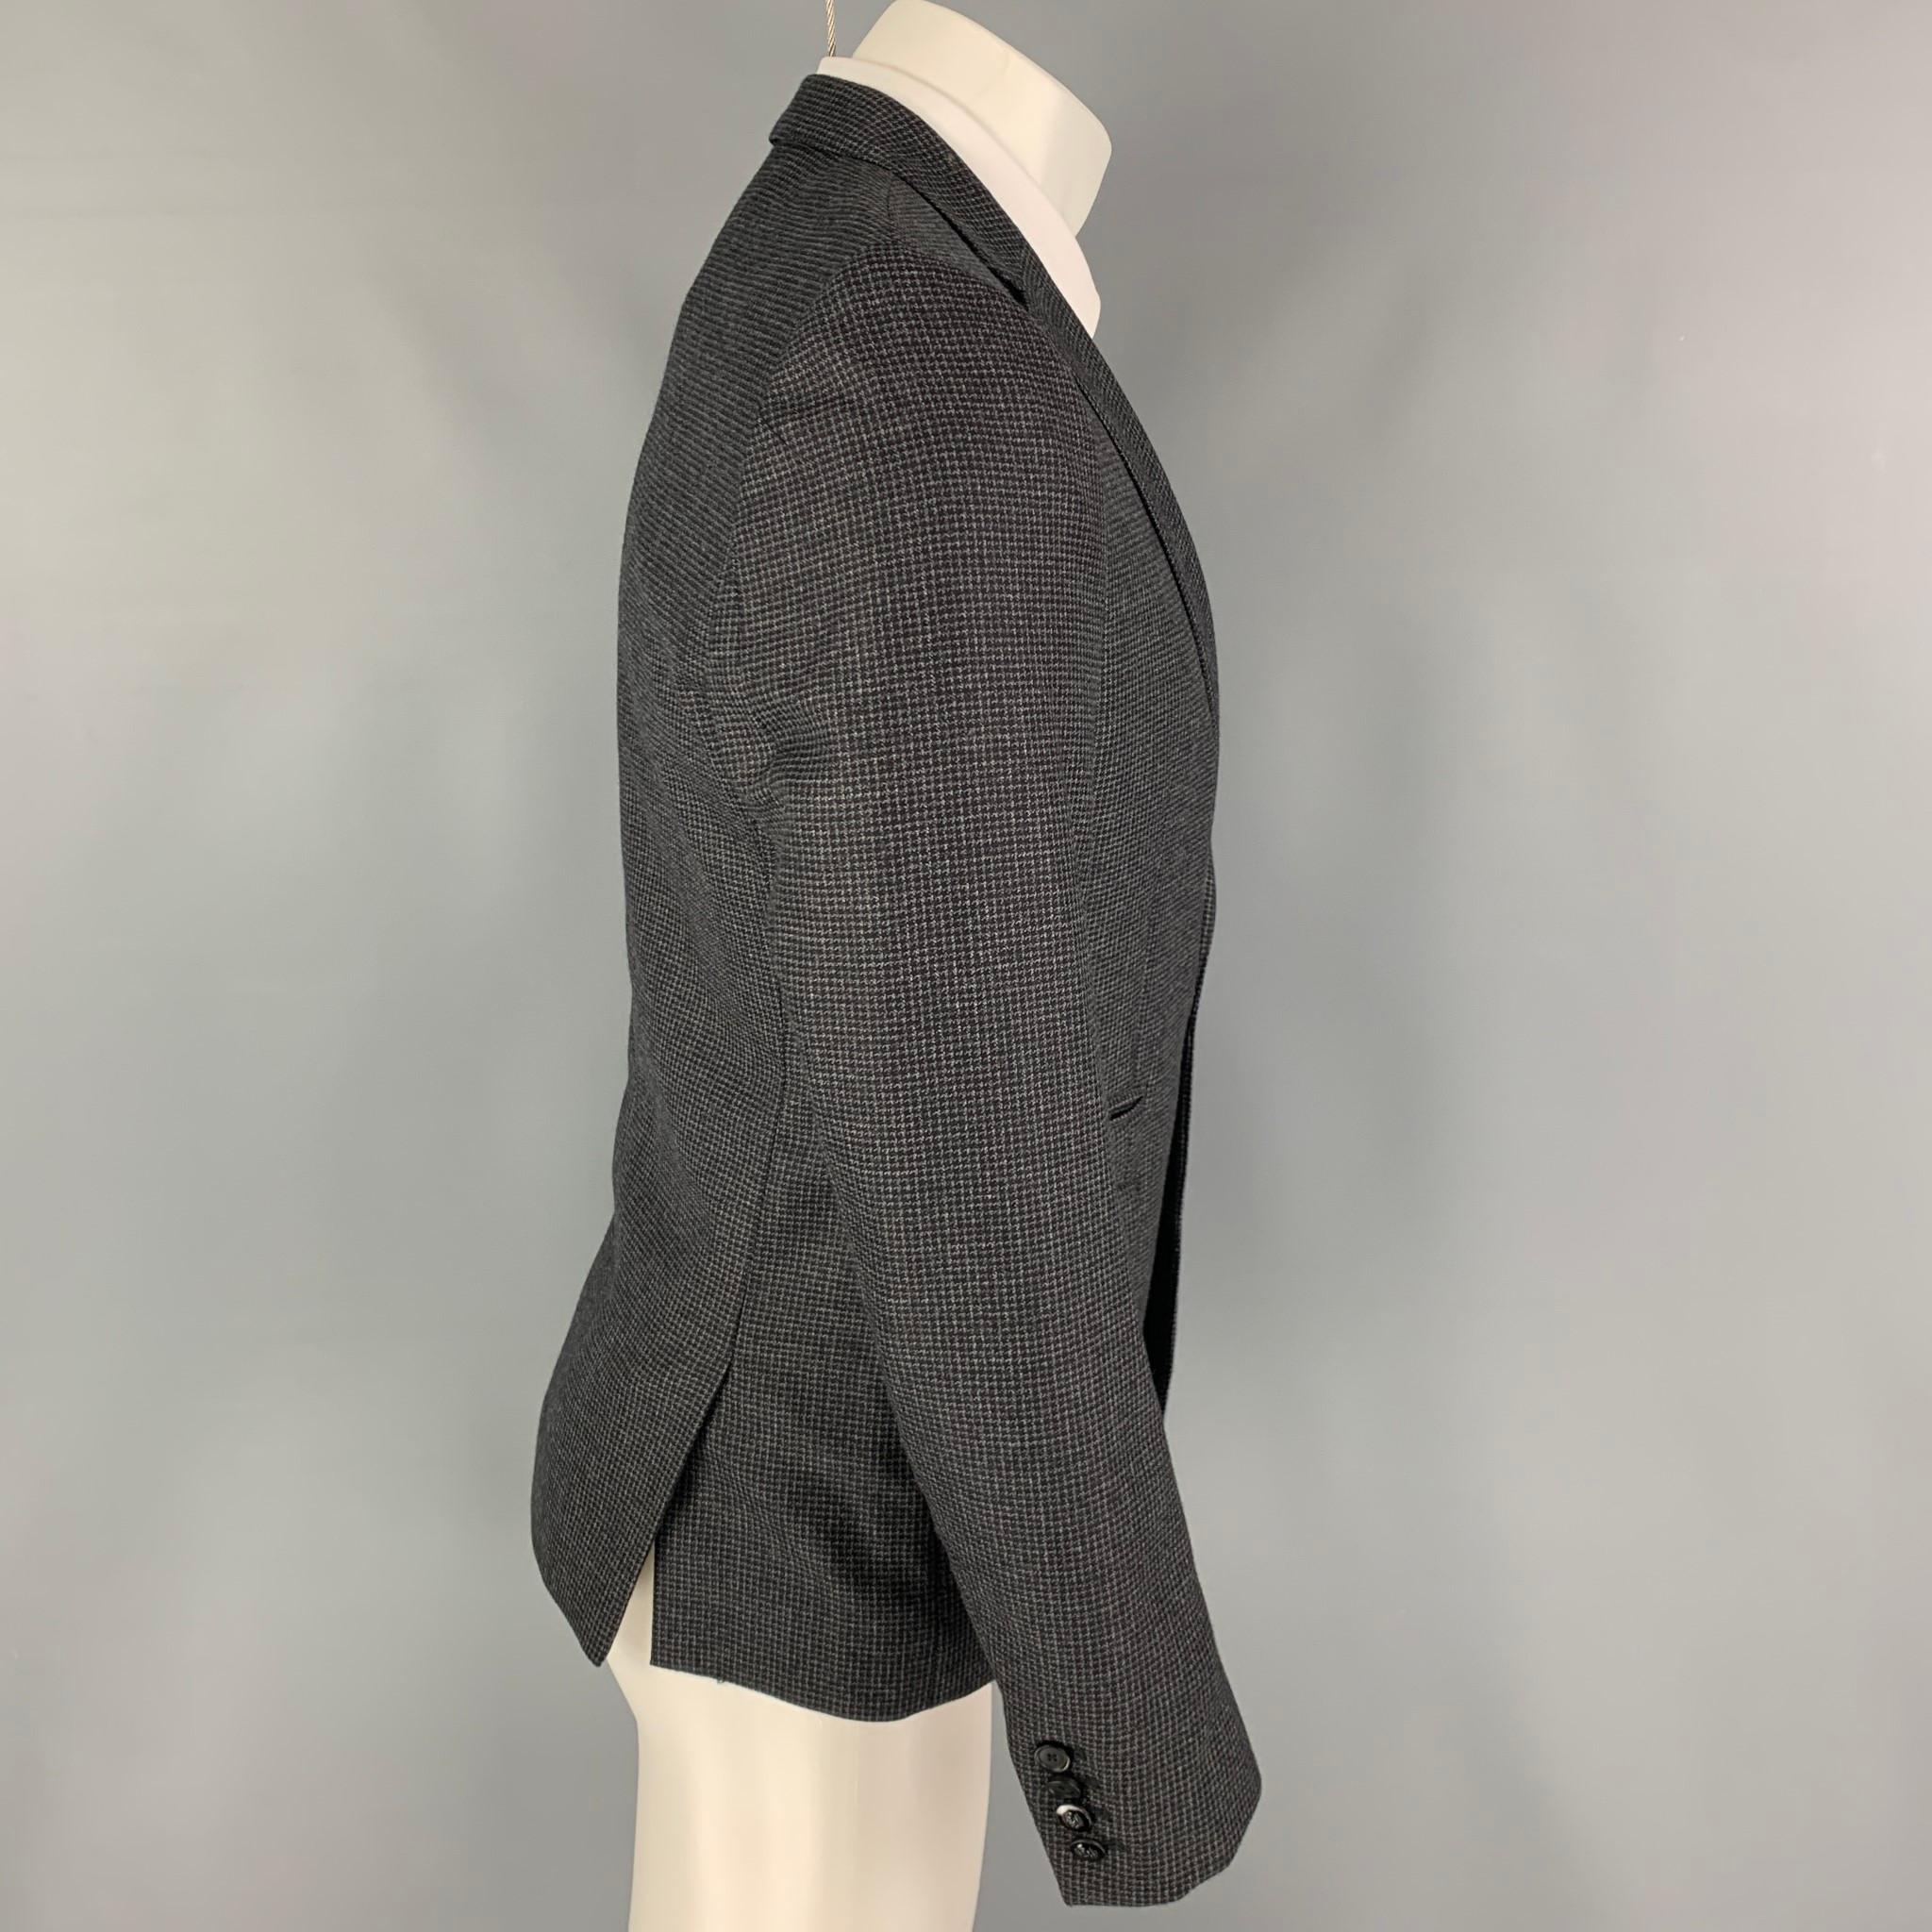 THE KOOPLES sport coat comes in a charcoal grey grid wool with a full liner featuring a notch lapel, flap pockets, double back vent, and a double button closure. 

Excellent Pre-Owned Condition.
Marked: 46

Measurements:

Shoulder: 17 in.
Chest: 36